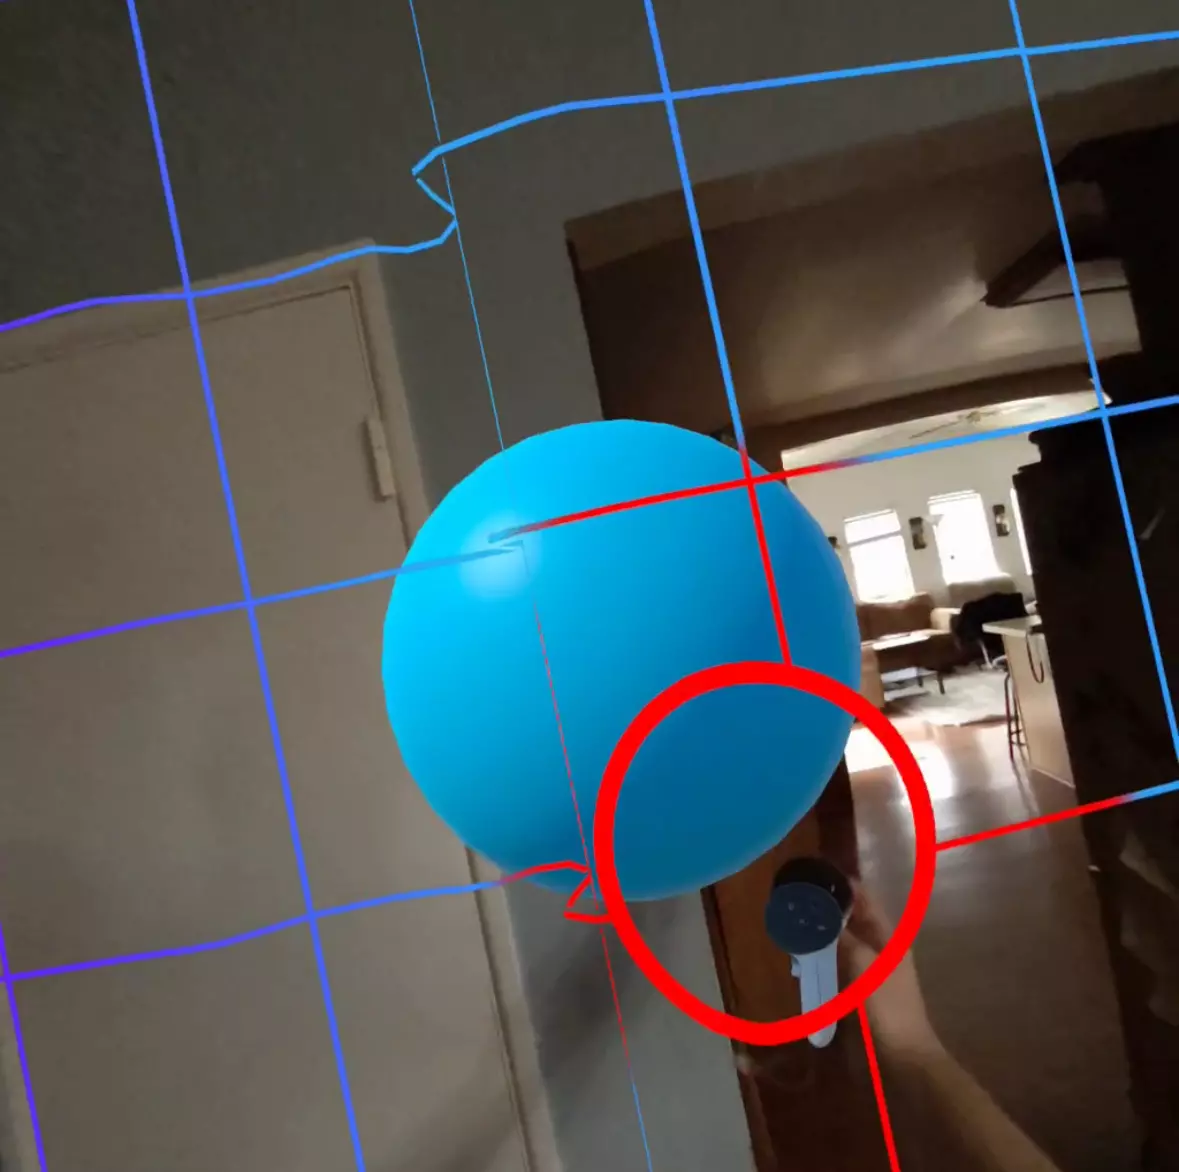 A blue sphere in a dining room with VR boundary lines